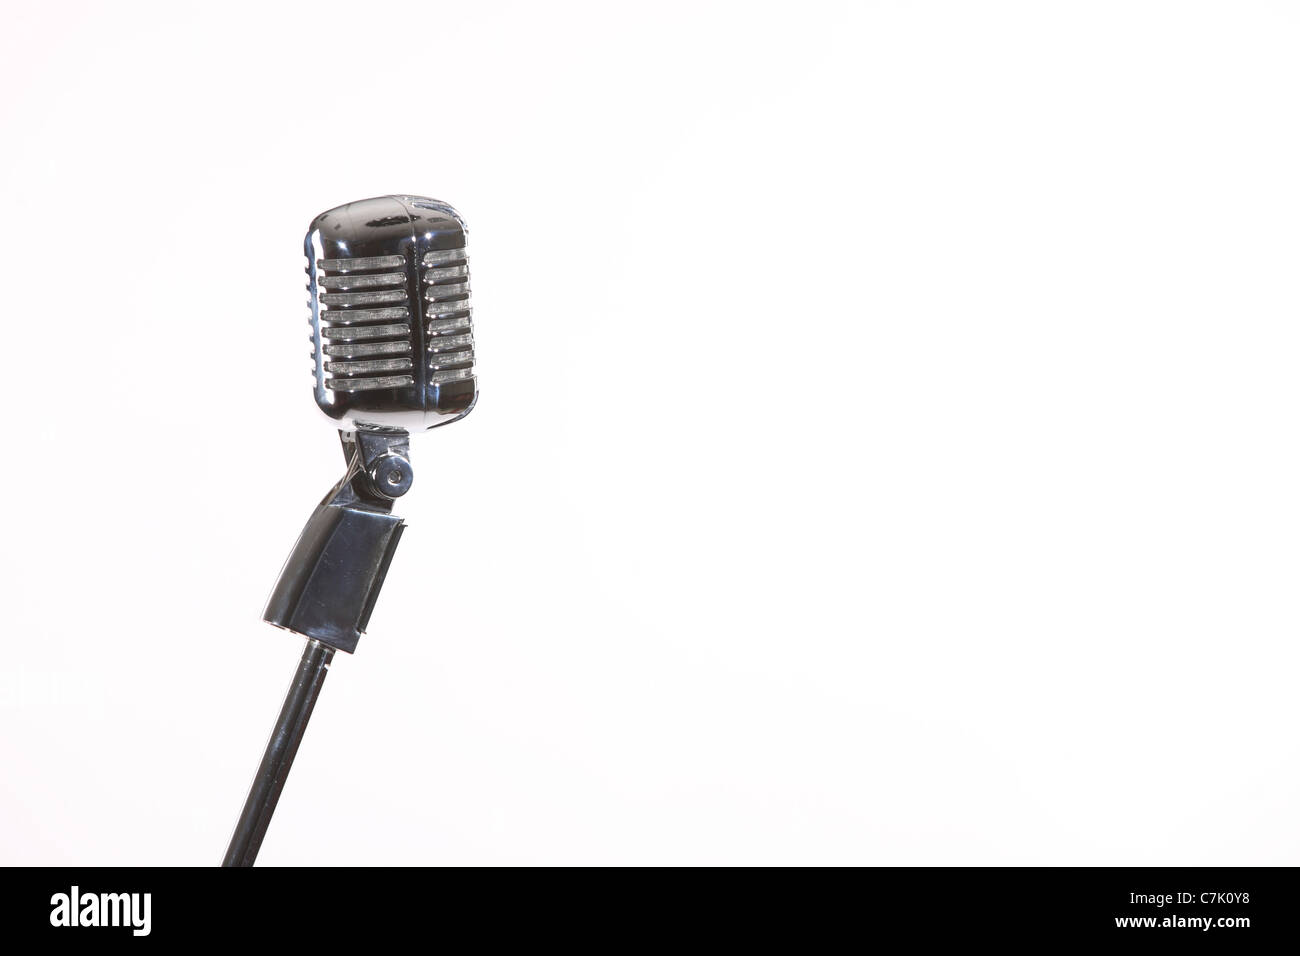 Microphone on a stand Stock Photo